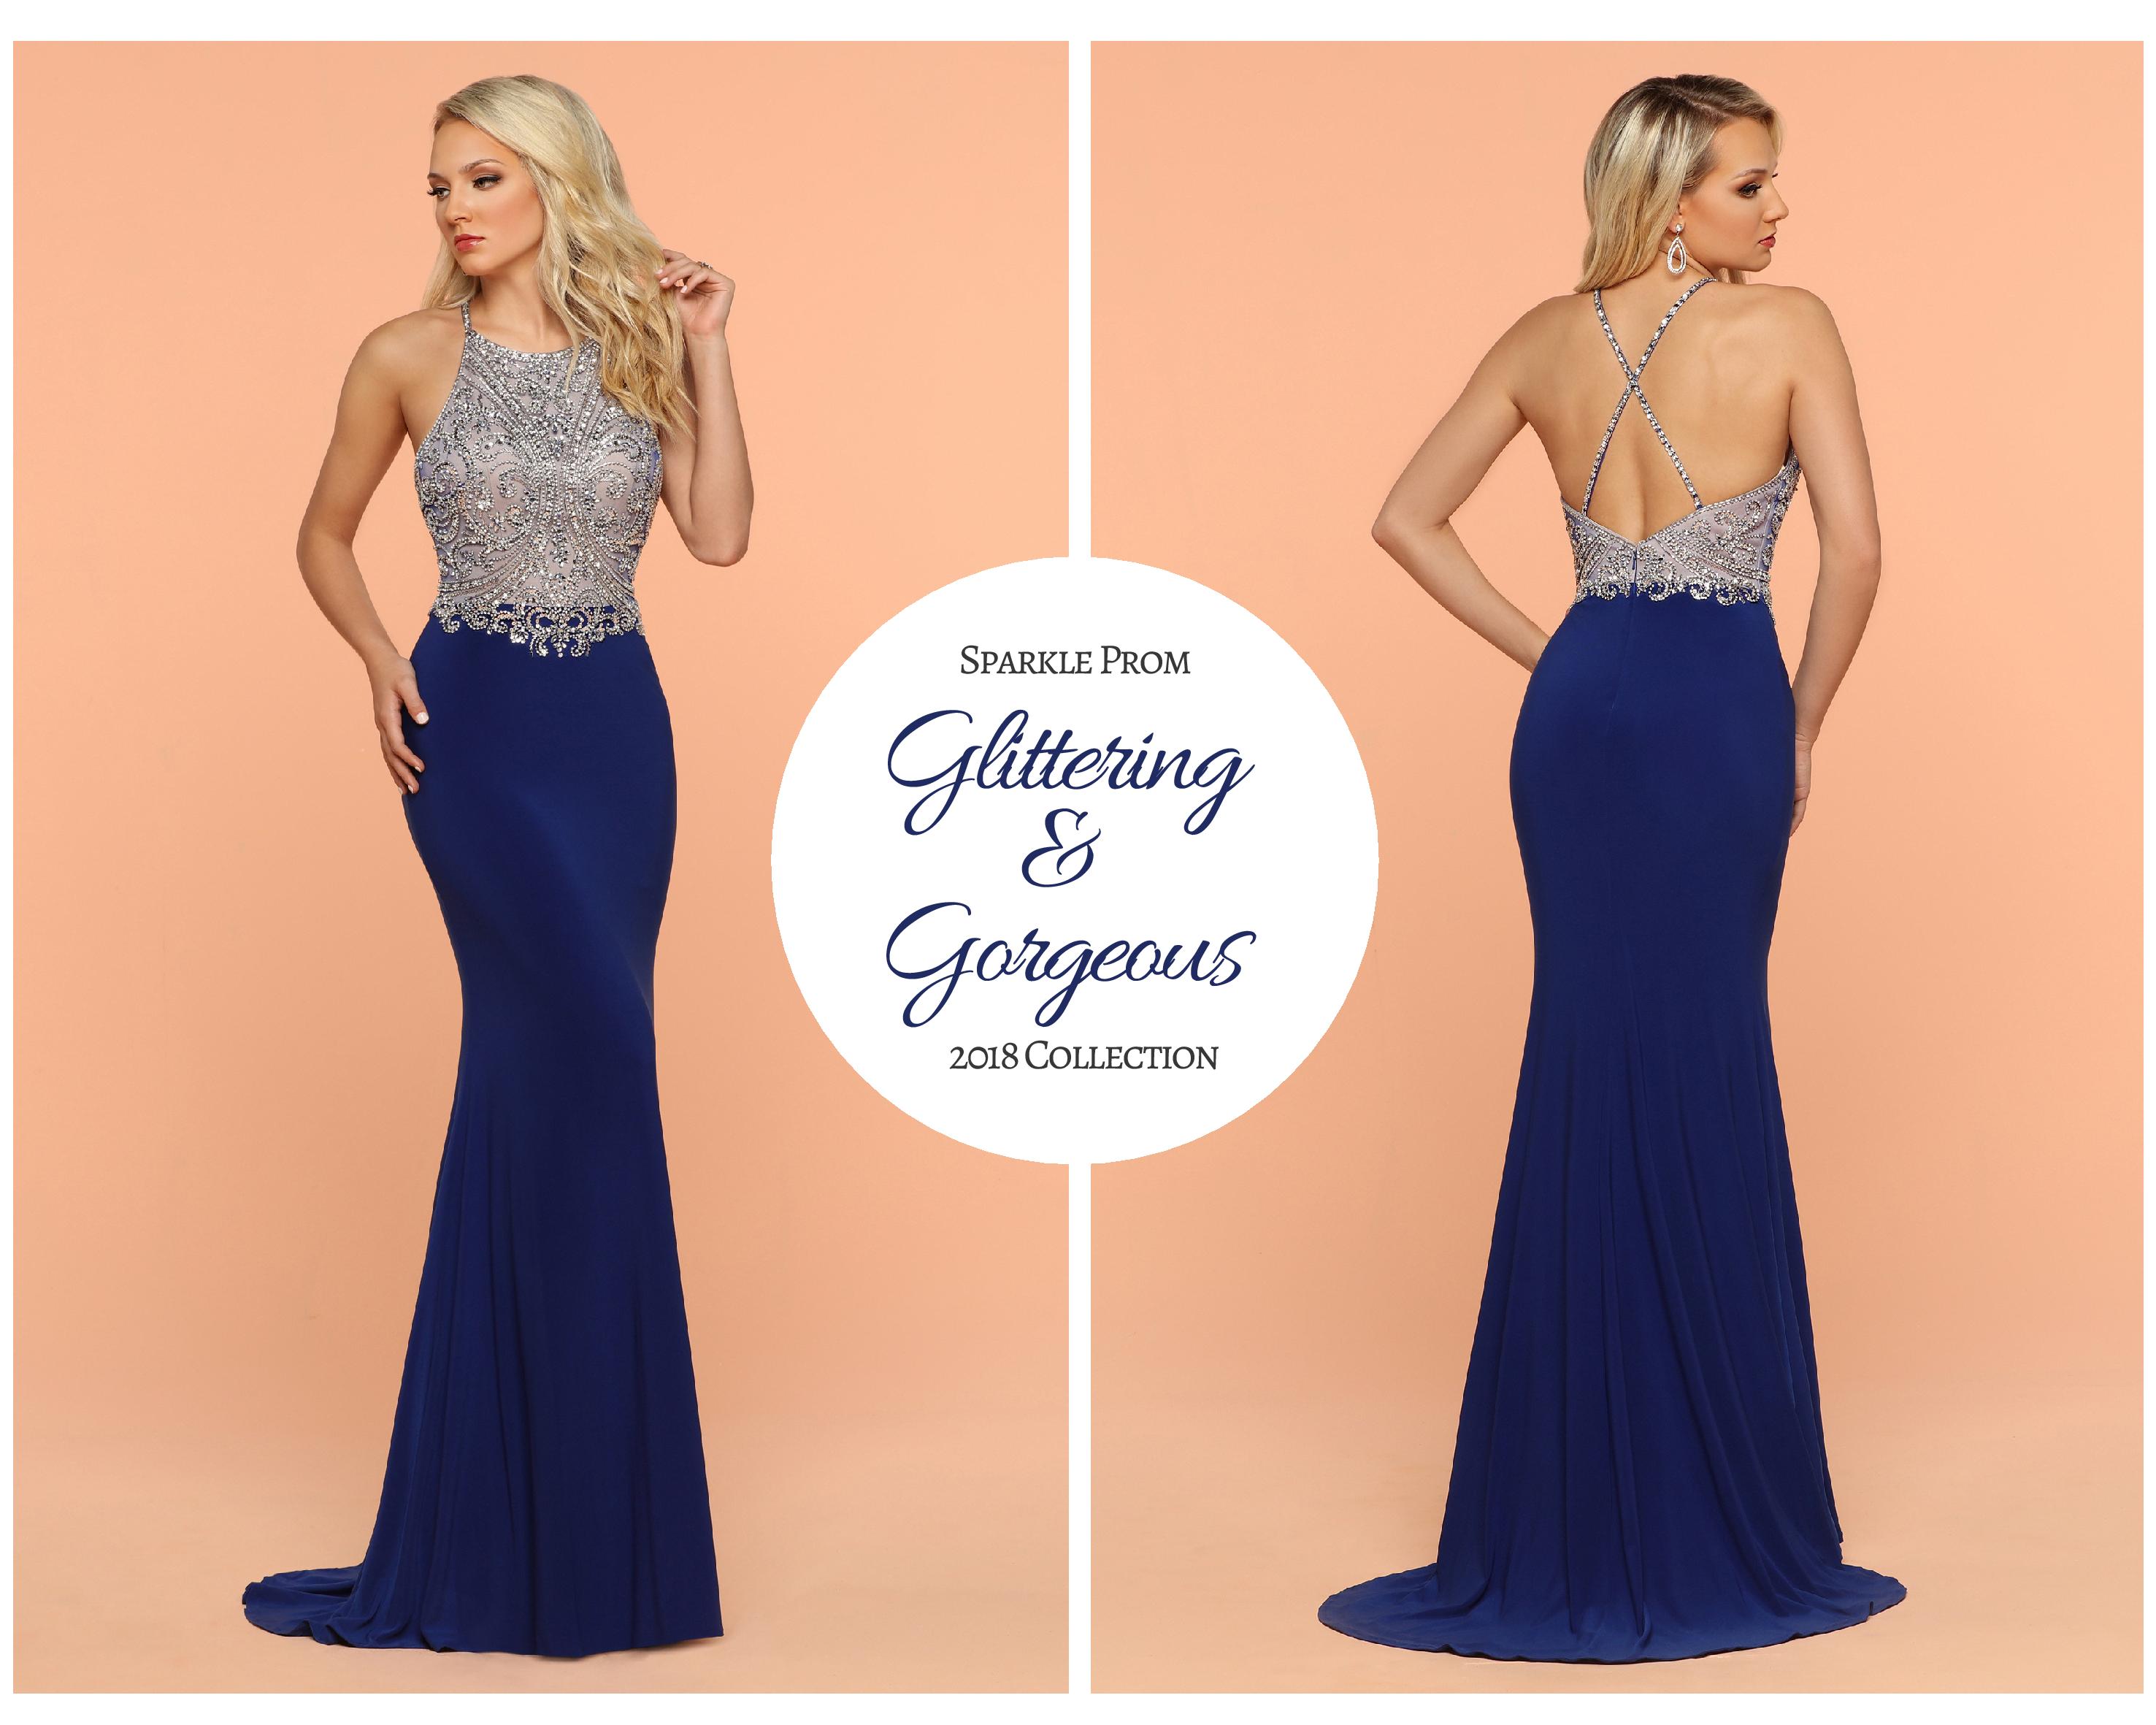 Glittering & Gorgeous in 2018: Prom Gowns with Bodice Detail – New Sparkle Prom Dresses